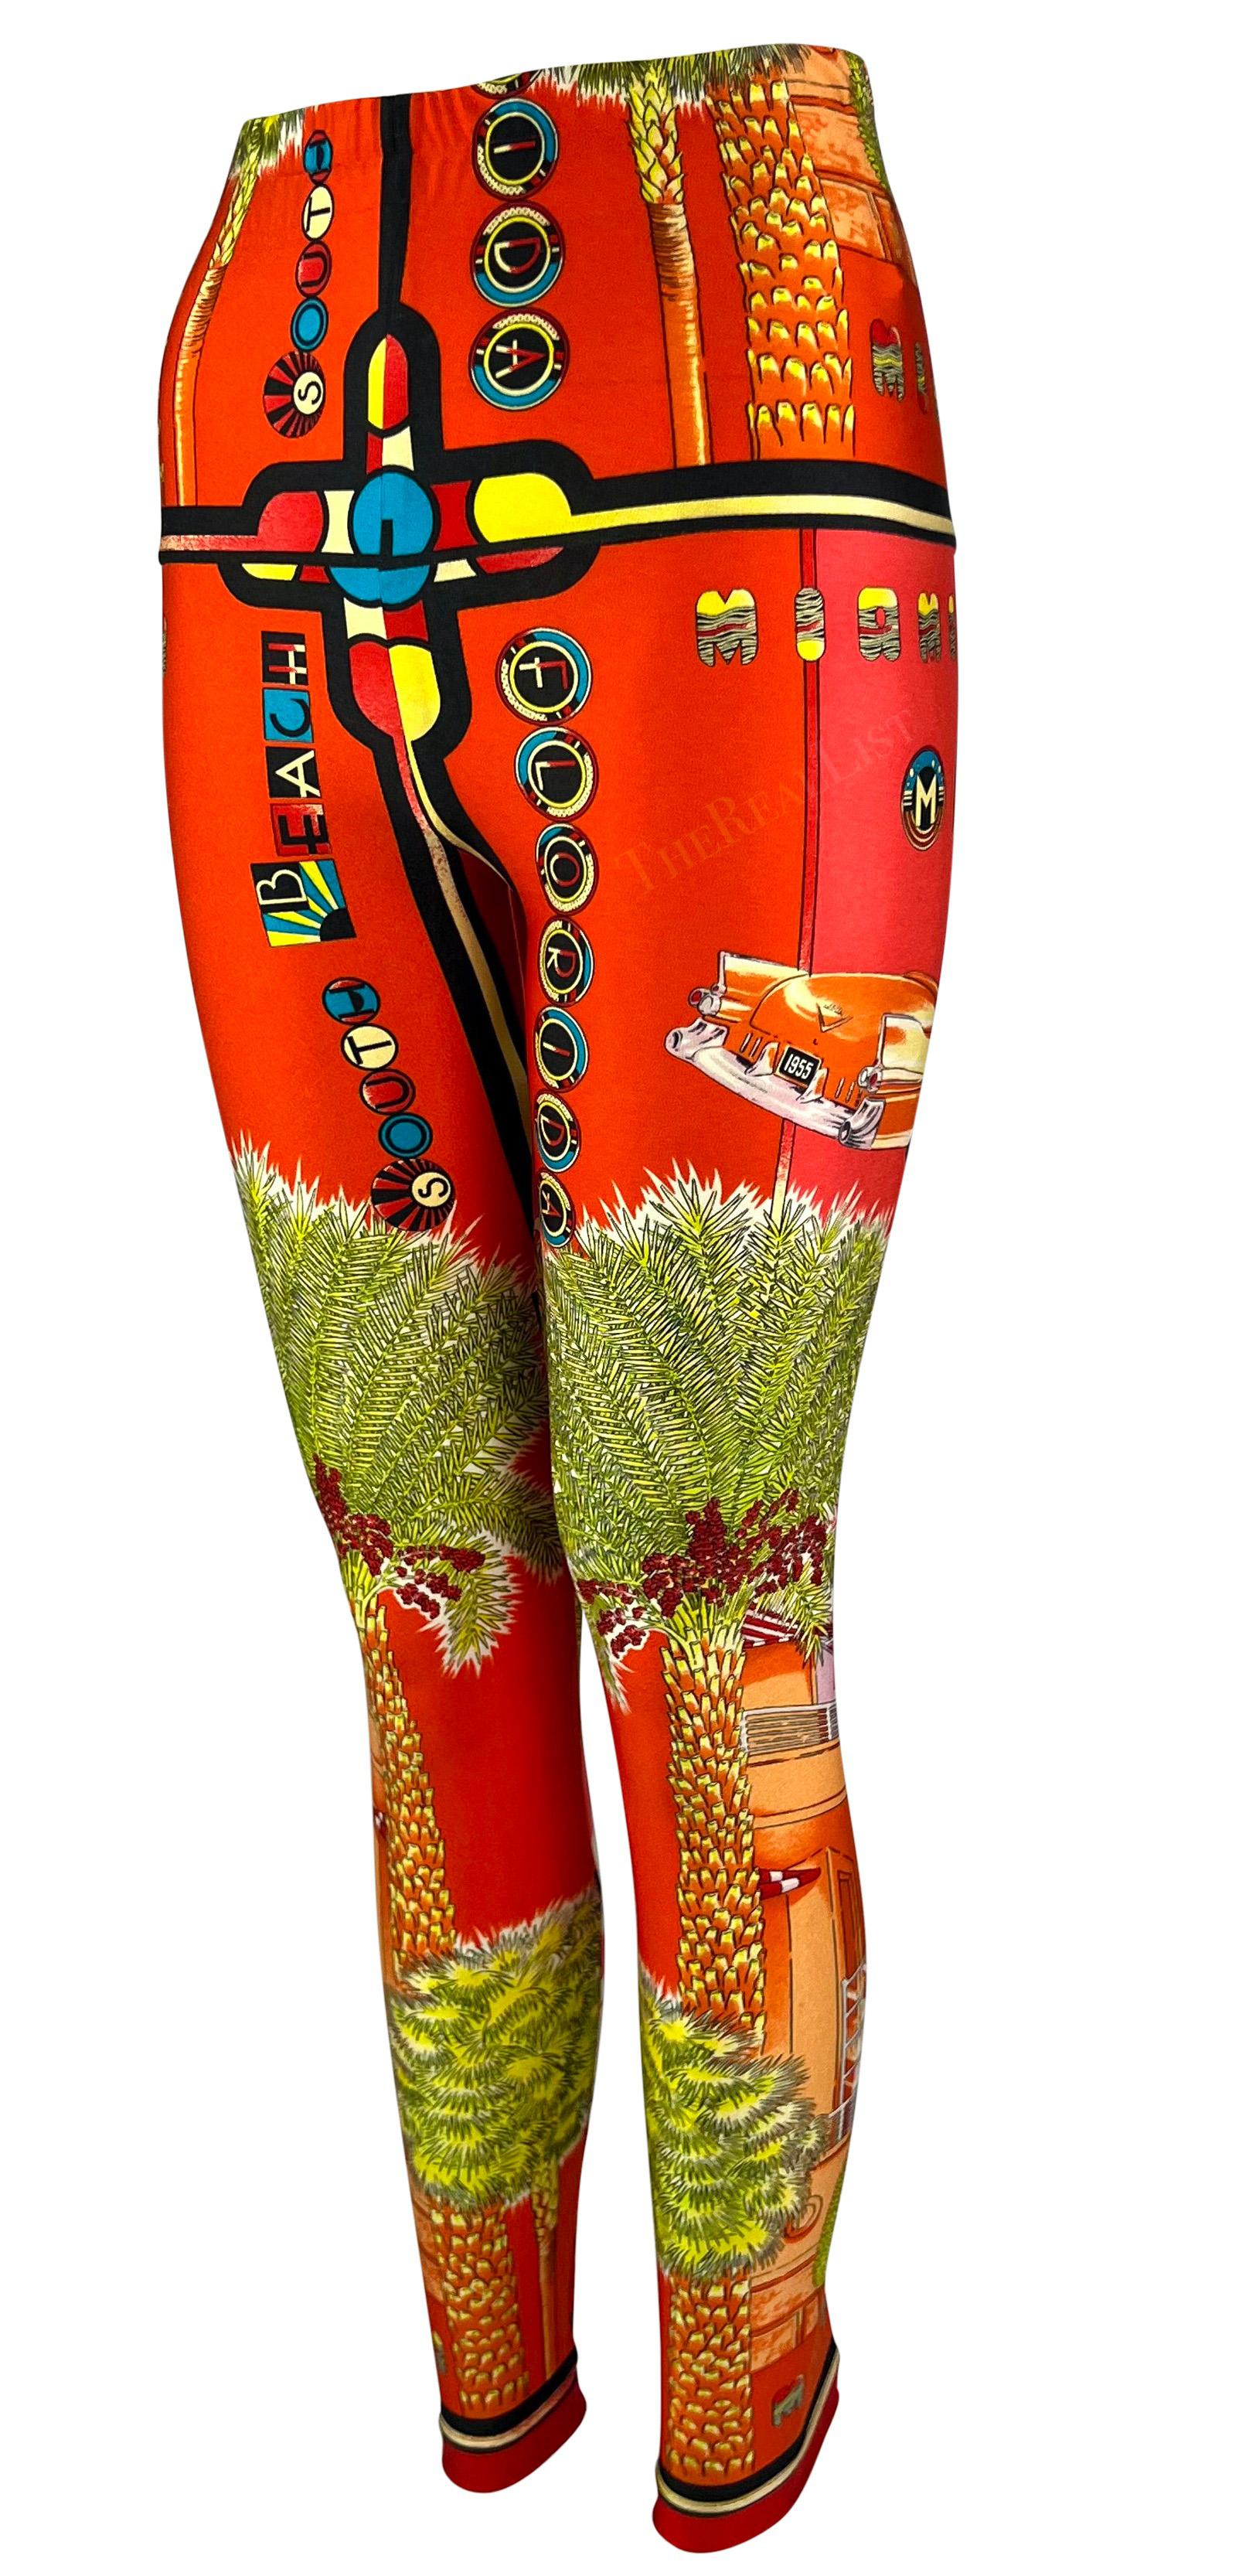 Women's S/S 1993 Gianni Versace South Beach Miami Sunset Orange Red Florida Print Tights For Sale